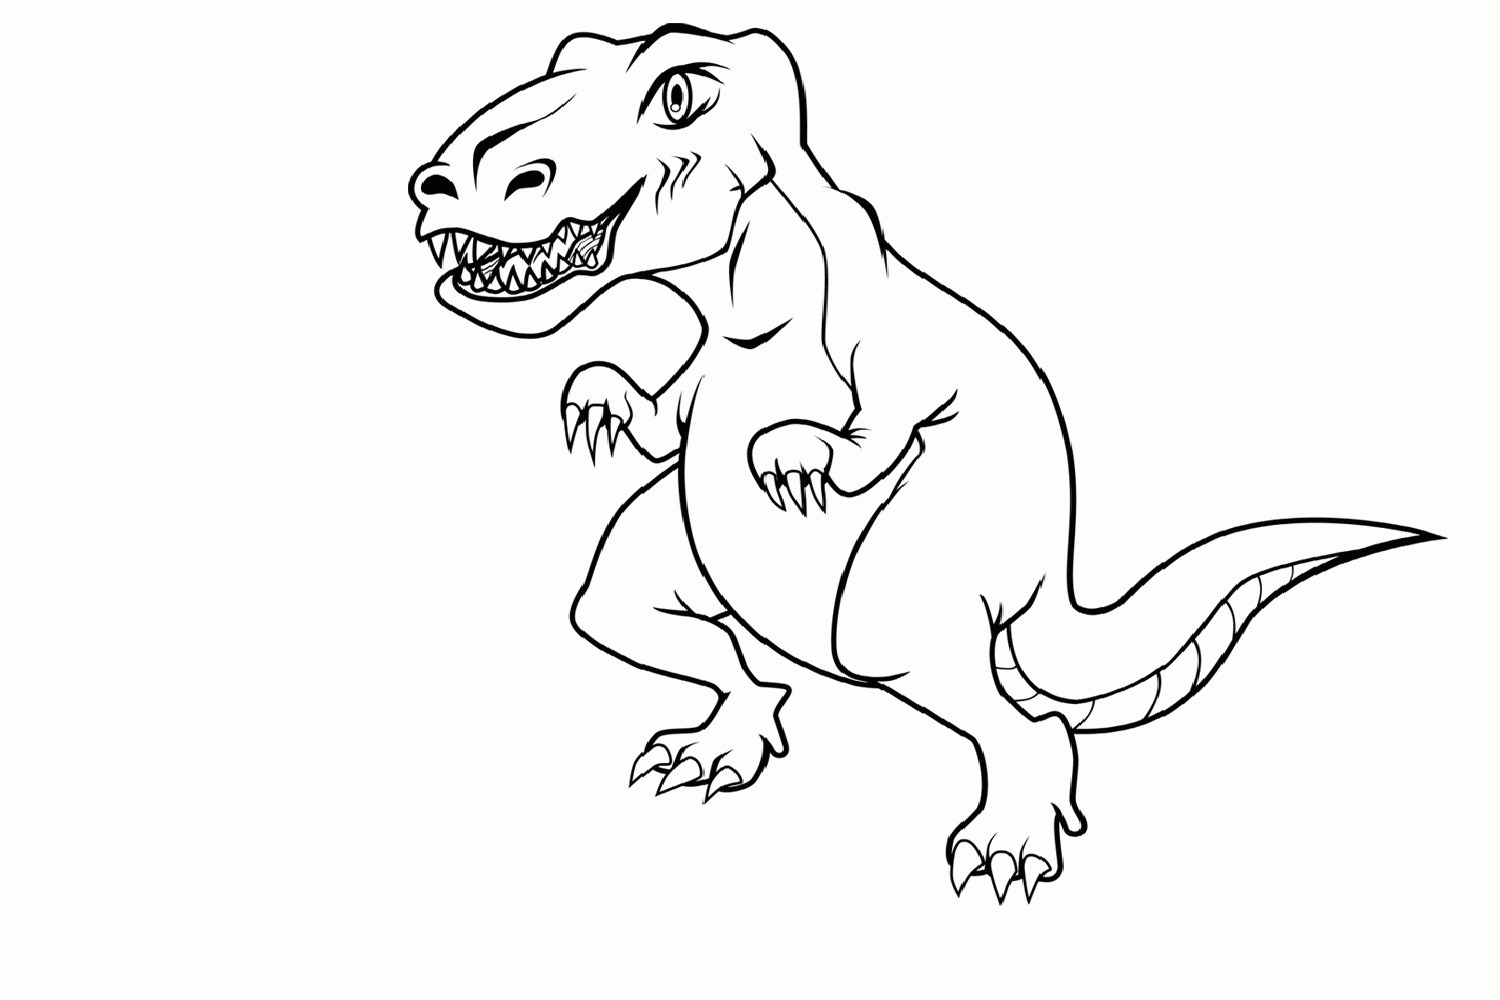 free-dinosaur-coloring-pages-for-preschoolers-download-free-dinosaur-coloring-pages-for